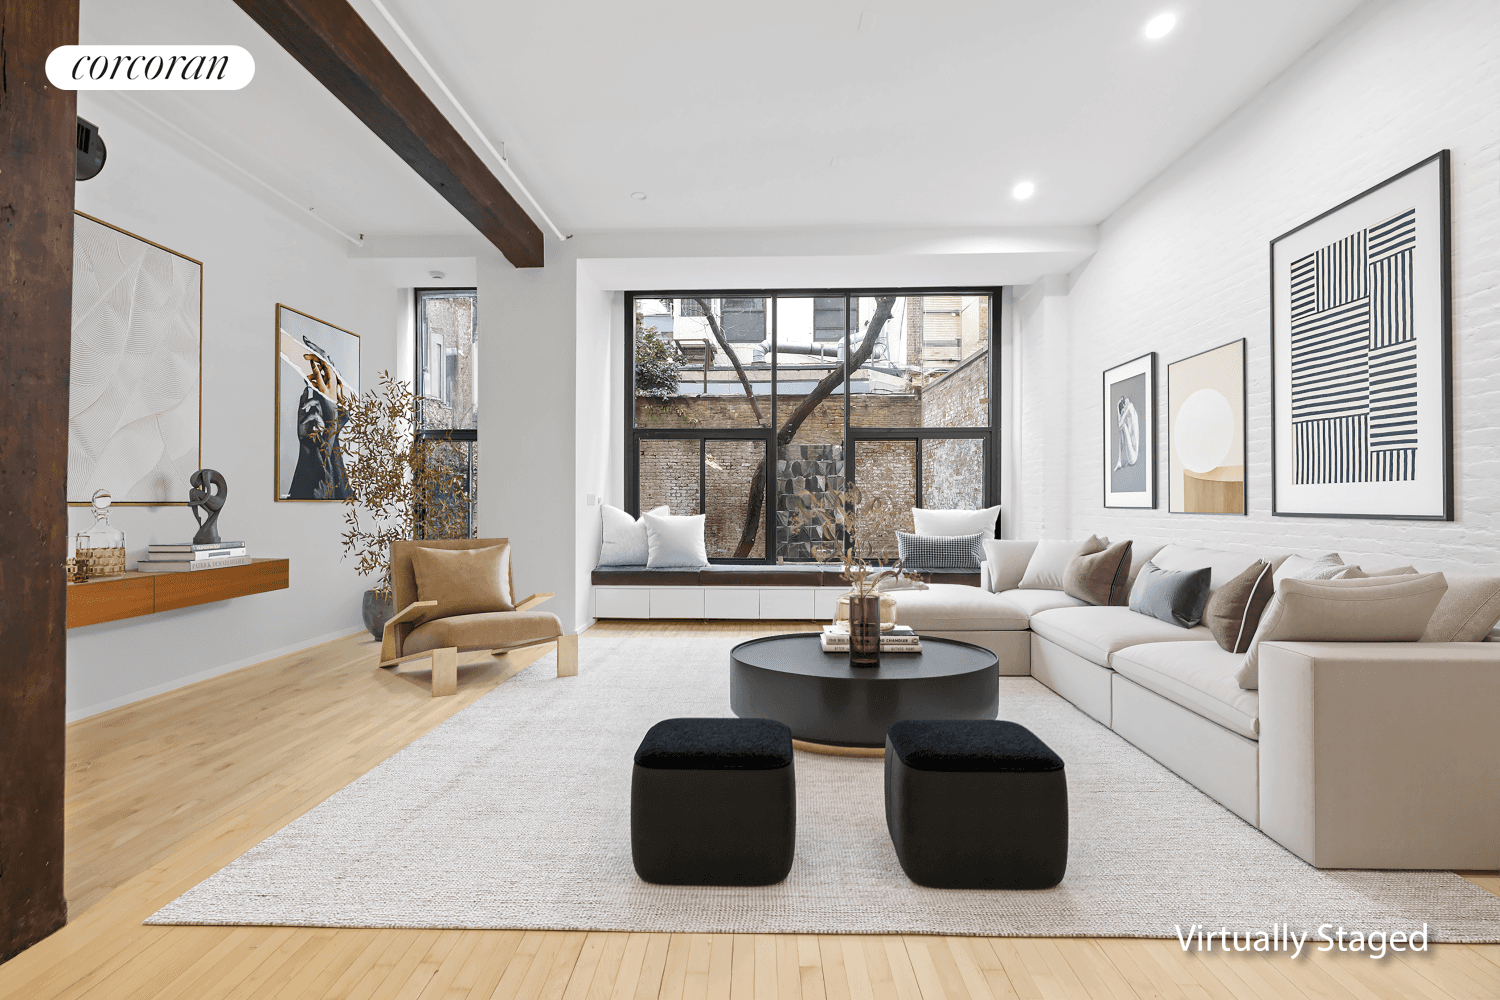 The perfect blend of SoHo loft living with private outdoor oasis.